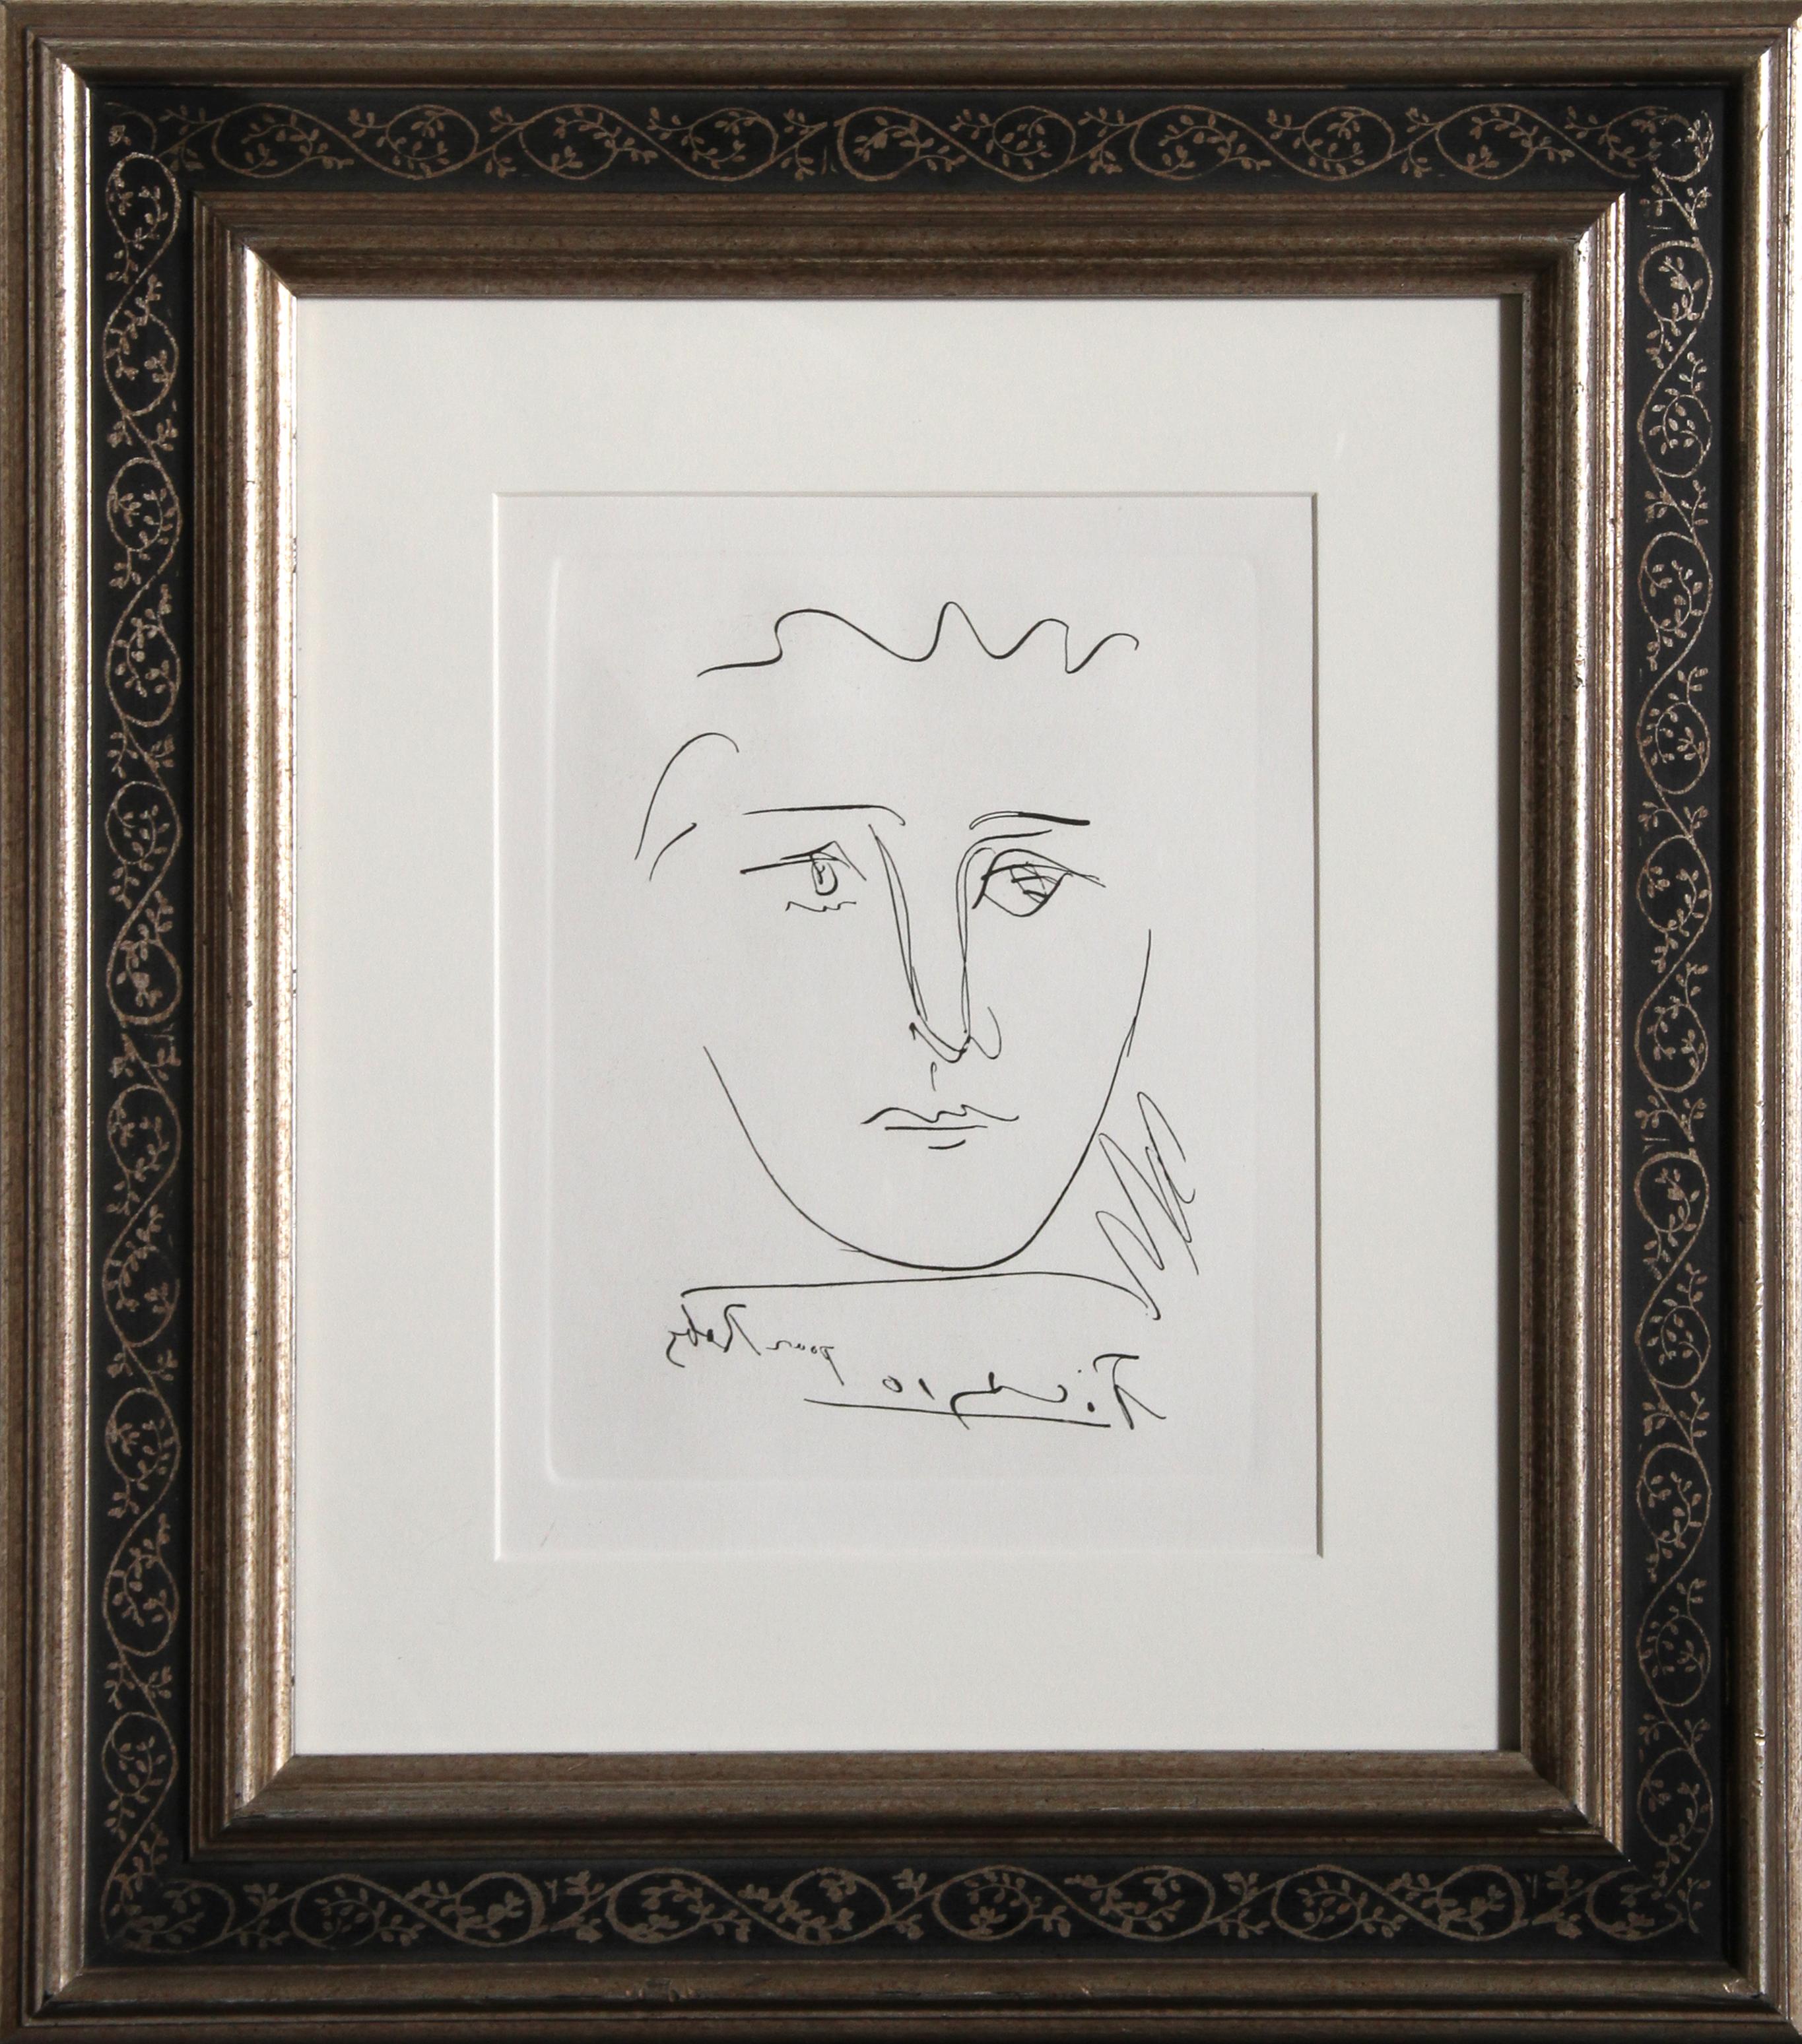 This minimalistic portrait by Pablo Picasso features thin lines that outline and frame the features of the face without oversimplifying the understated, fresh composition. A restrike etching published by the Collector’s Guild circa 1968. Nicely